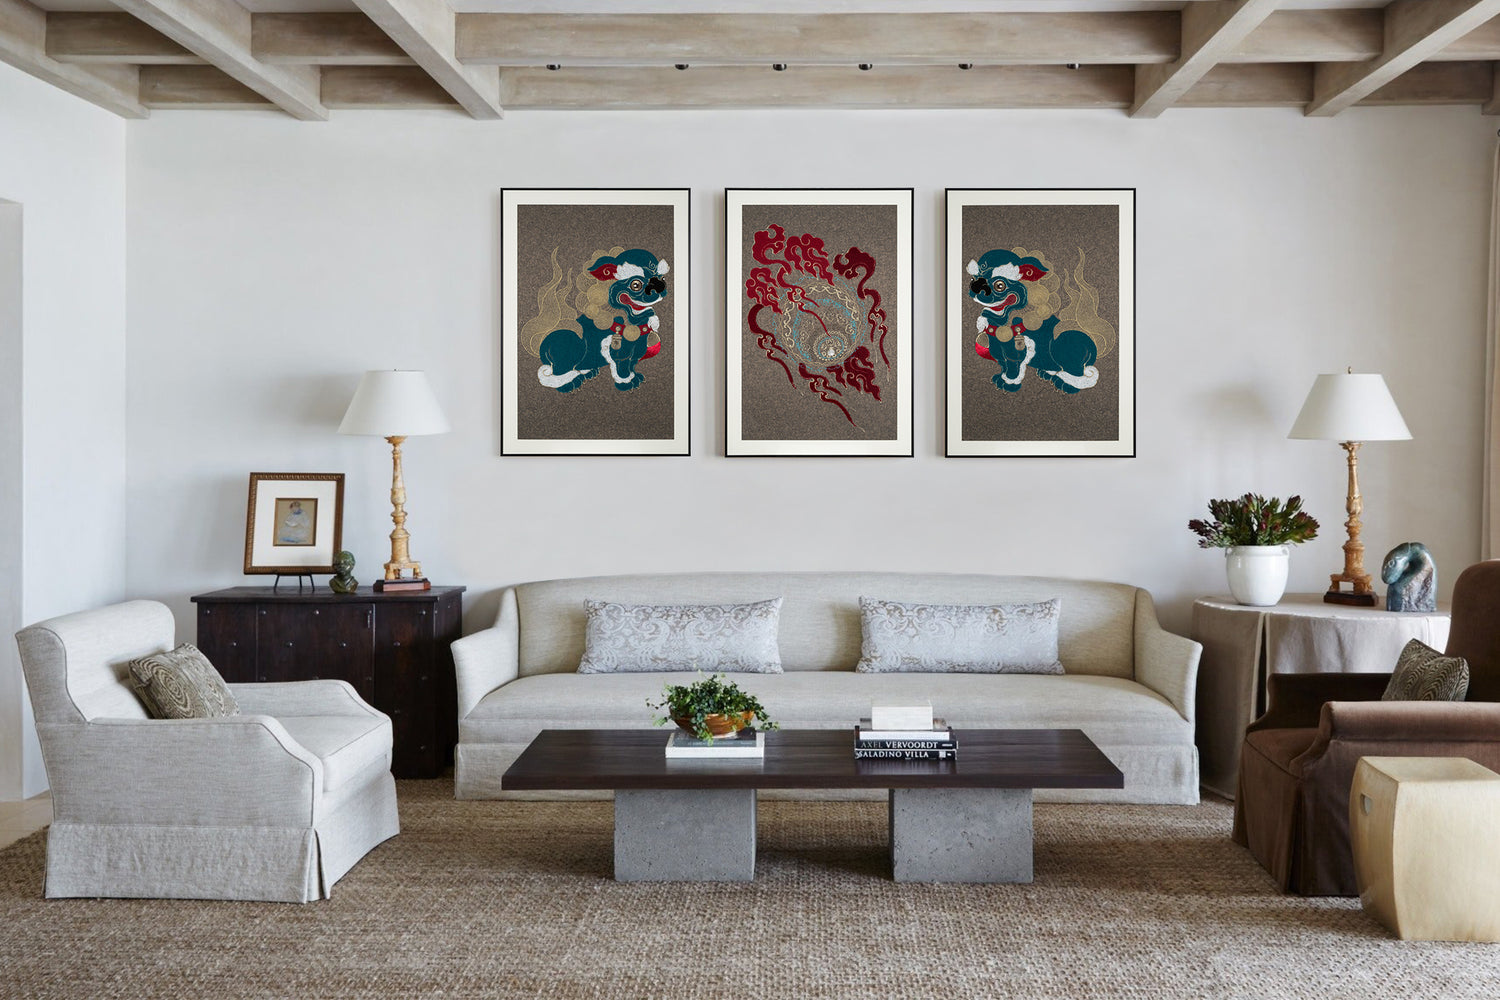 Modern living room showcasing a set of framed embroidery artworks featuring a lion ball play design, adding an artistic touch.